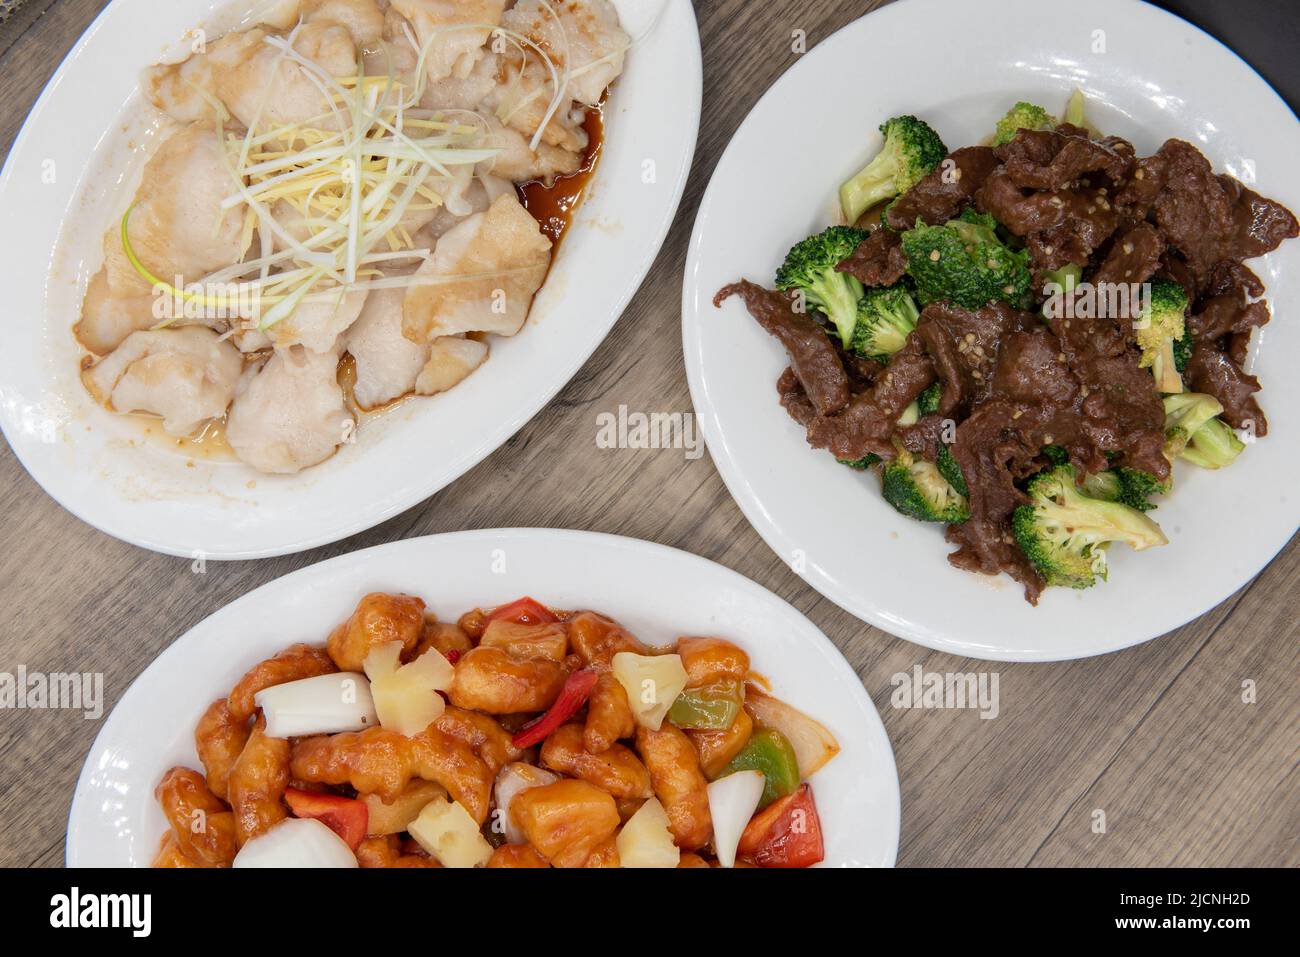 Overhead view of temping choices of meals with the beef and broccoli featured, for a great Chinese food meal. Stock Photo